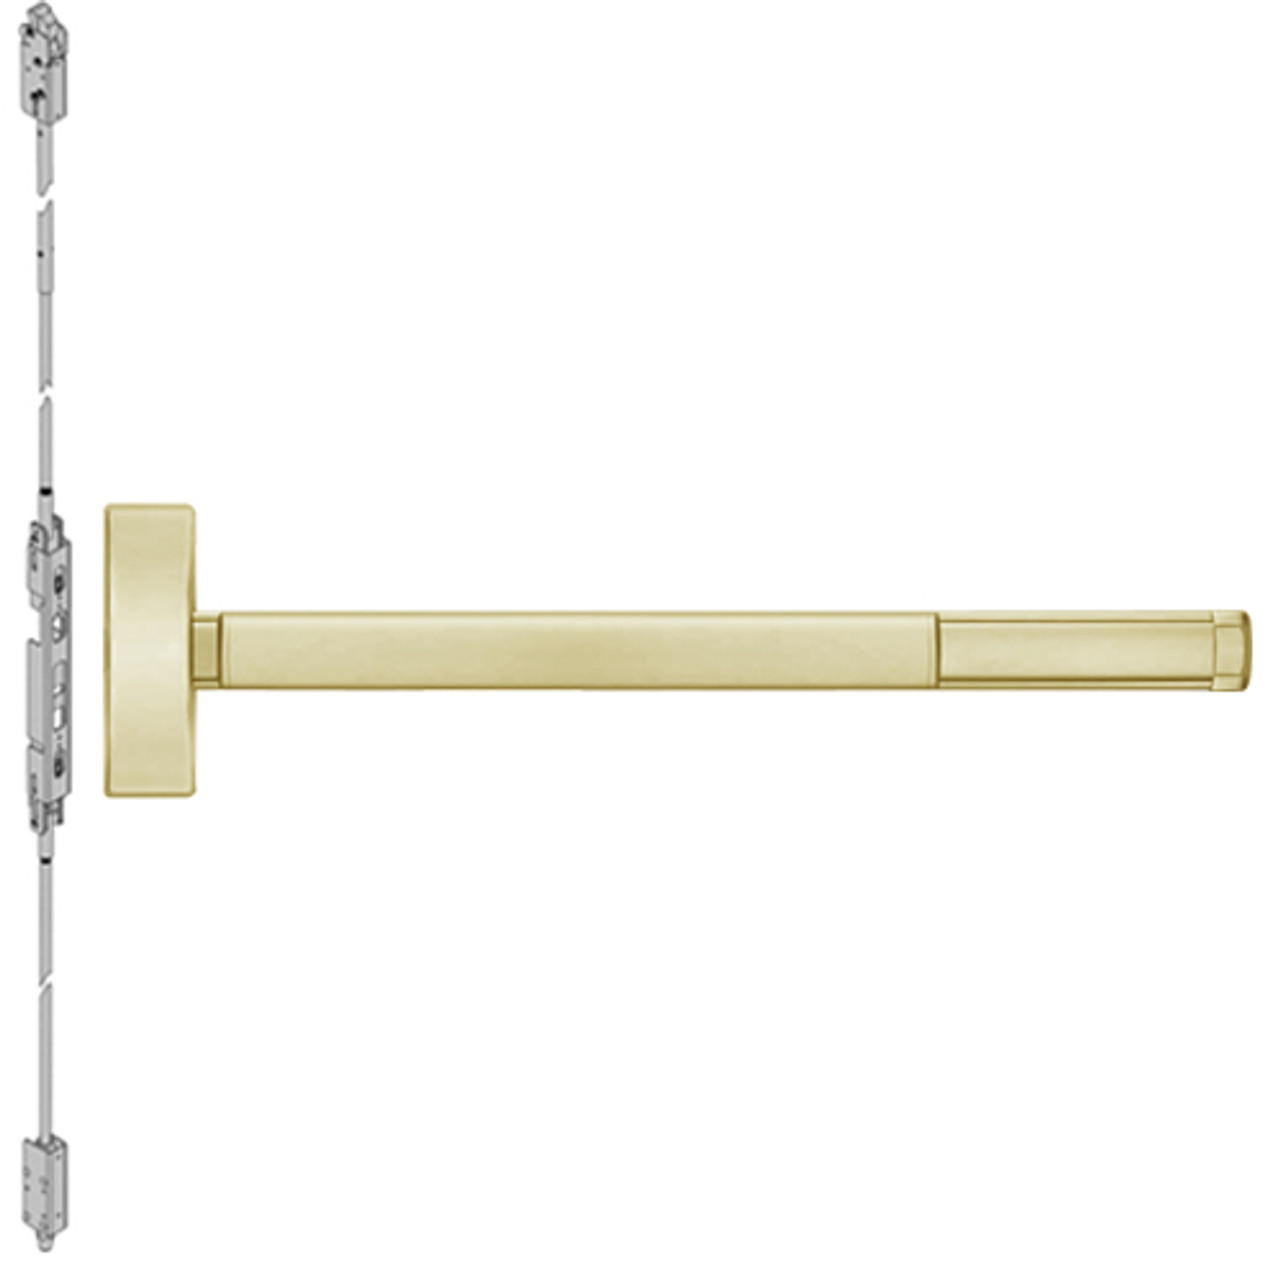 MLR2805-606-36 PHI 2800 Series Concealed Vertical Rod Exit Device with Motorized Latch Retraction Prepped for Key Controls Thumb Piece in Satin Brass Finish